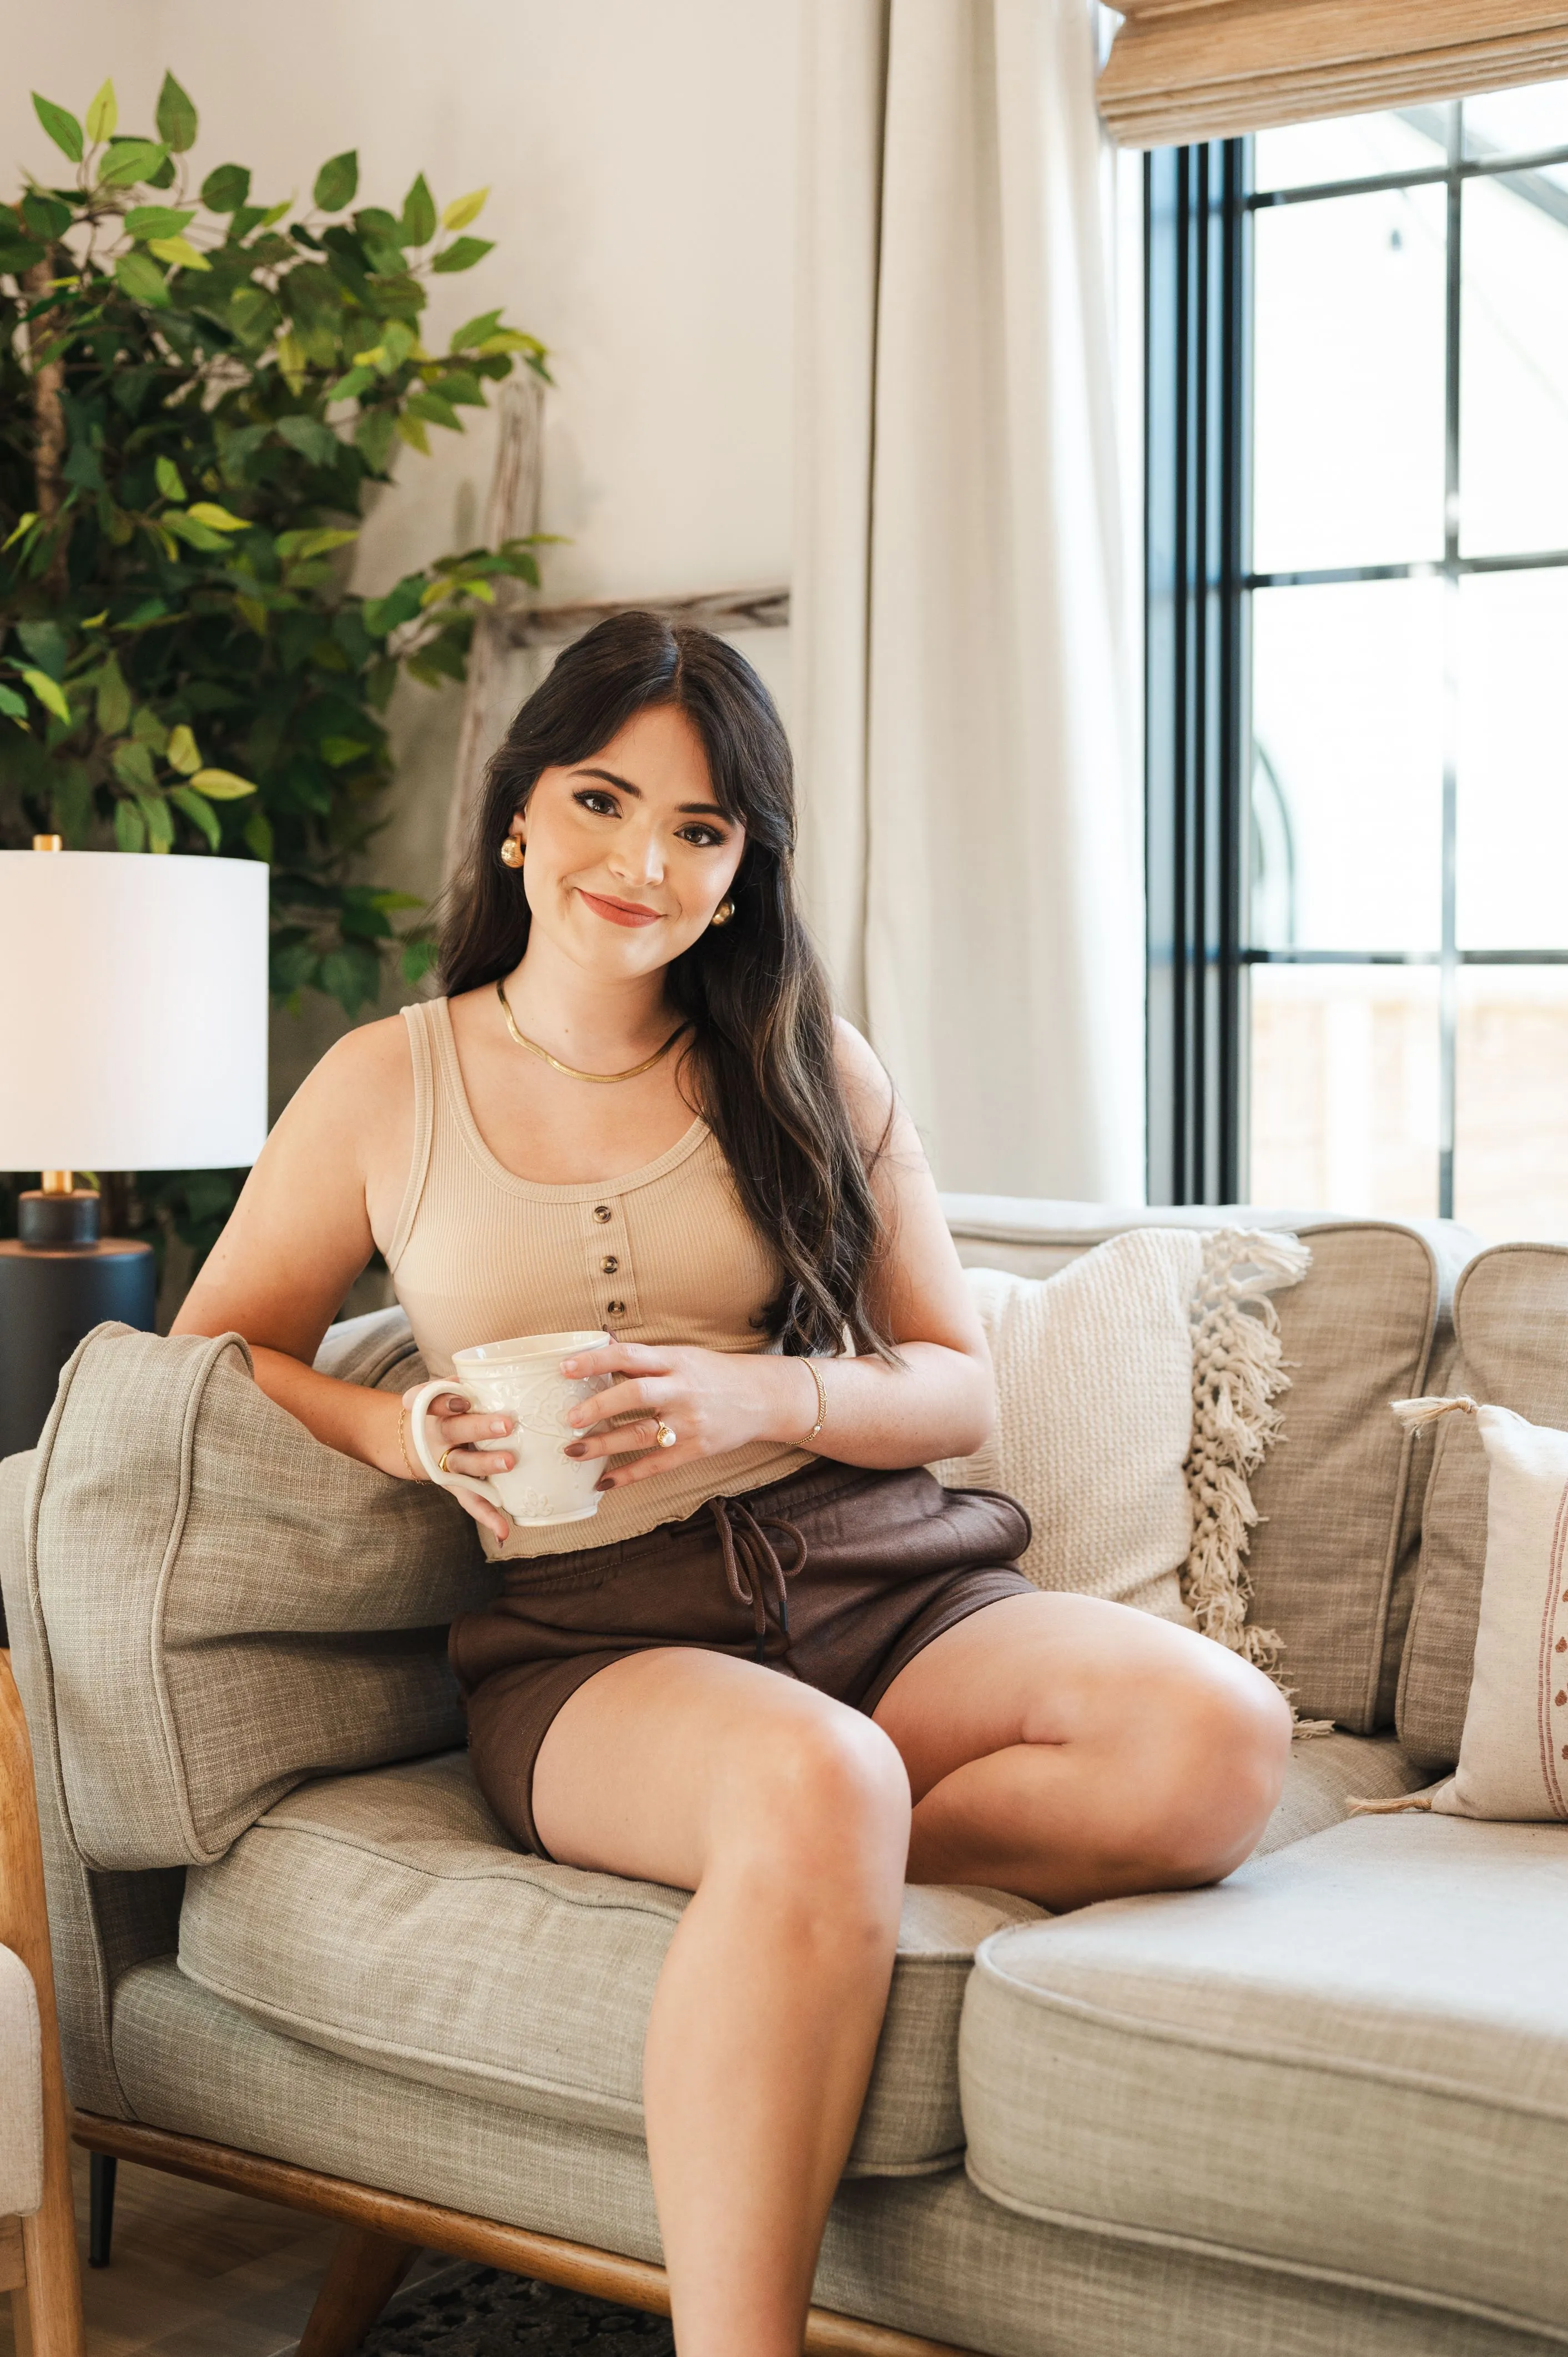 Woman smiling while sitting on a couch holding a cup, with a plant and sunlight coming through a window in the background.